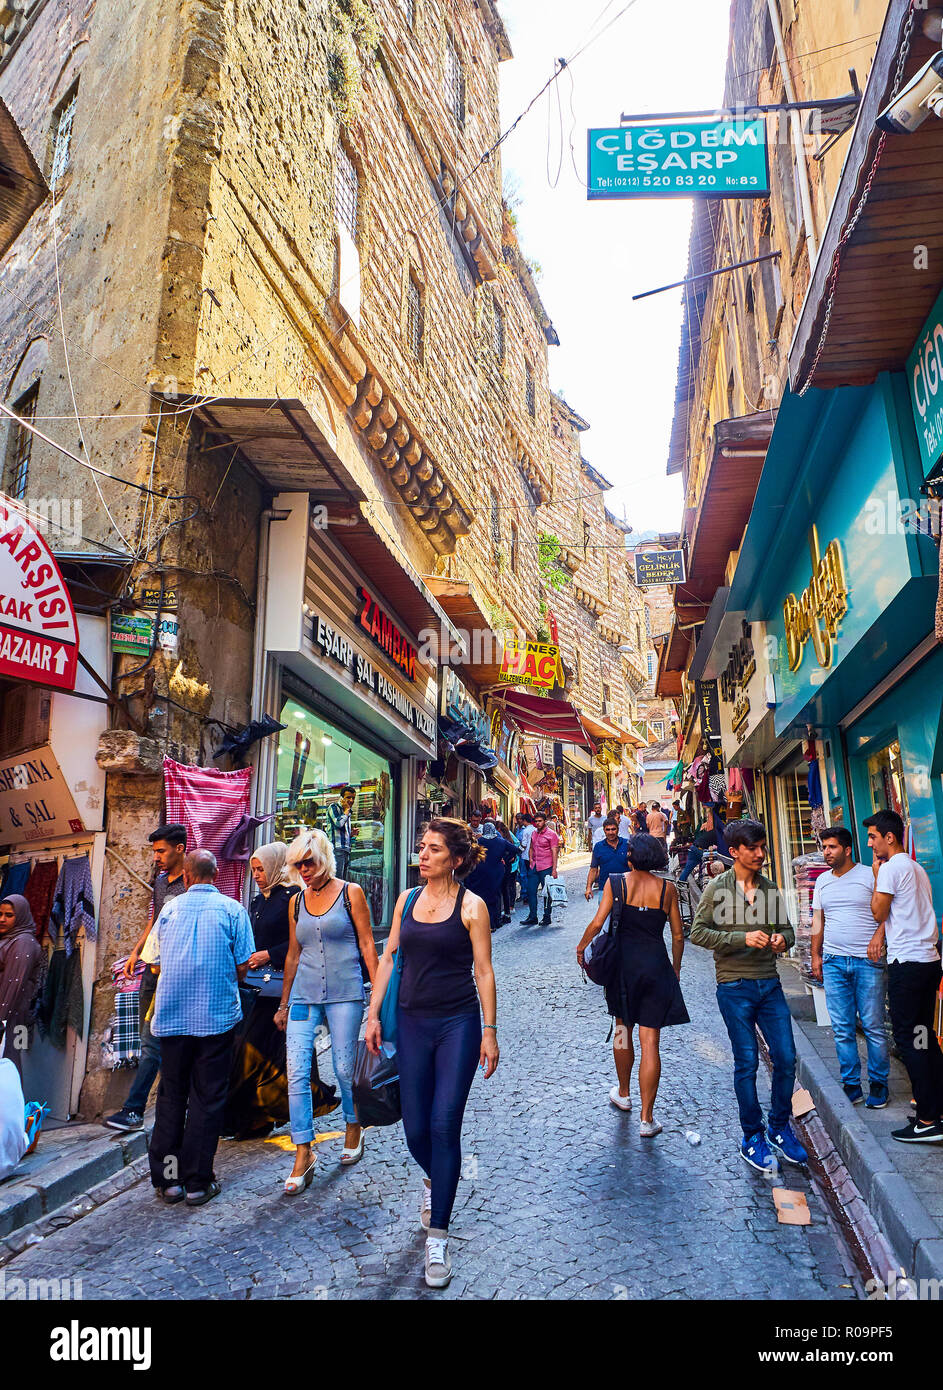 Citizens walking in Cakmakcilar street, a typical commercial street of Eminonu neighborhood, Fatih district. Istanbul. Turkey. Stock Photo